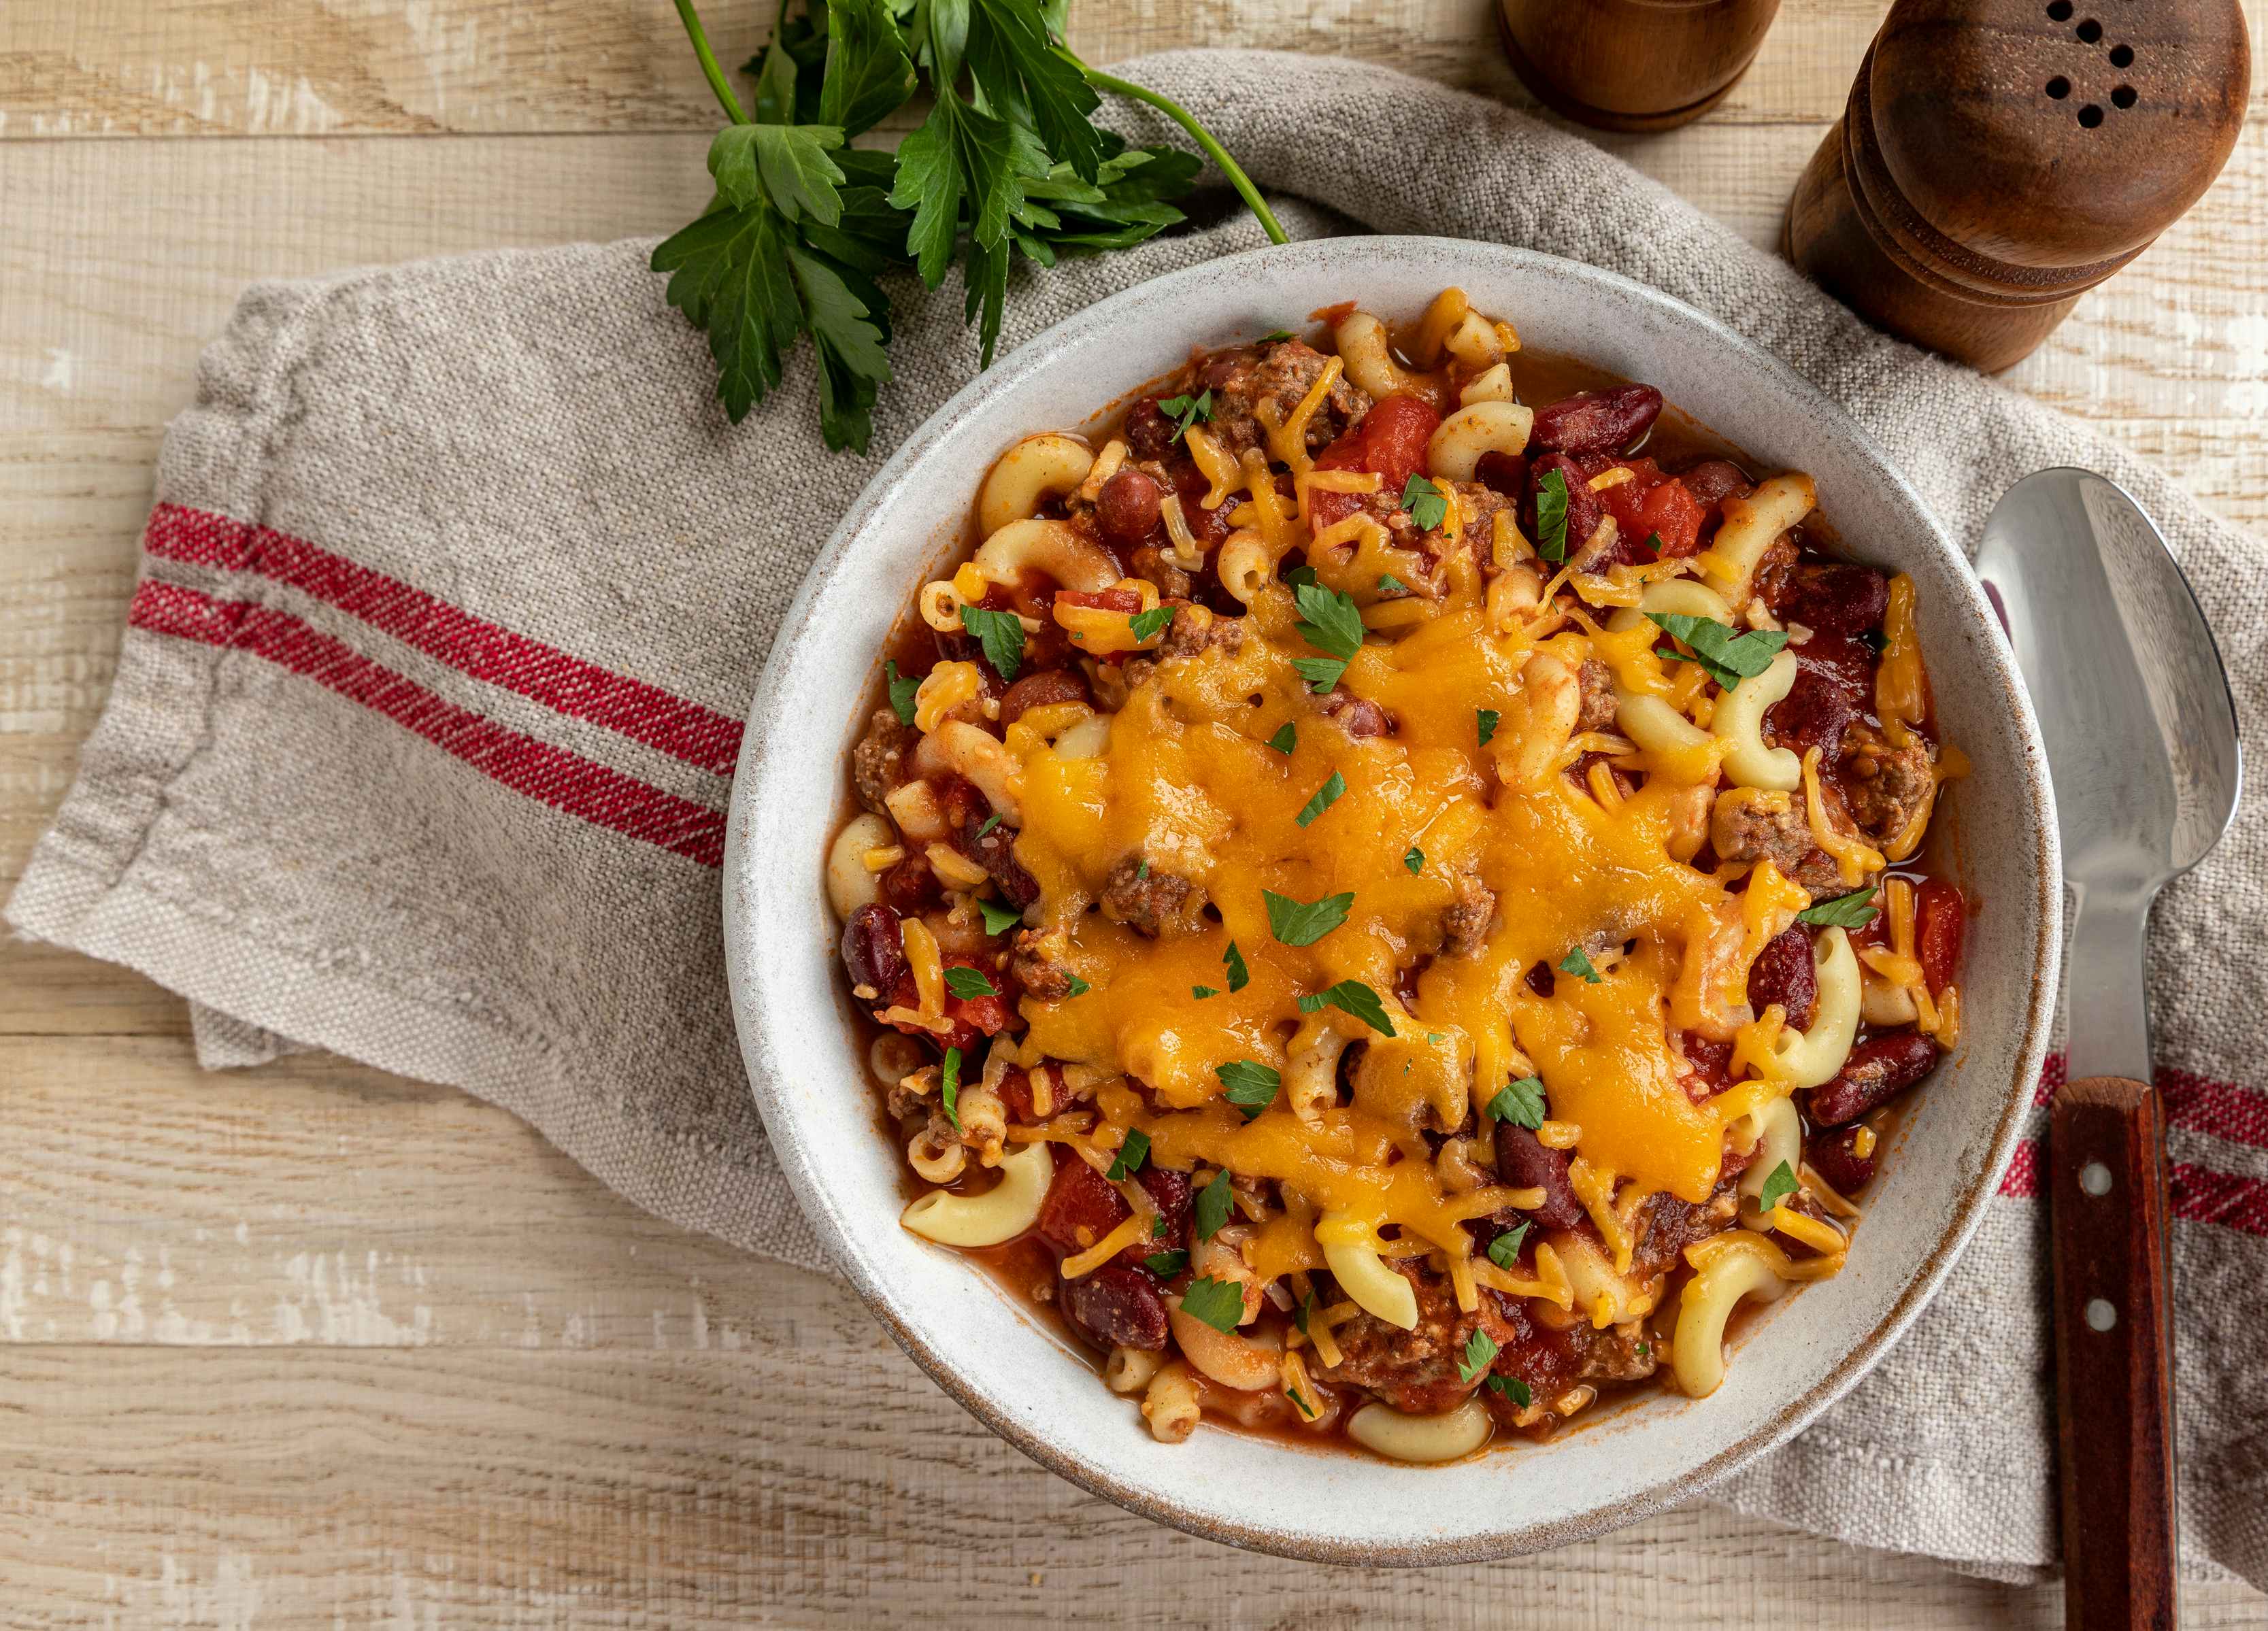 https://prod-cdn-thekrazycouponlady.imgix.net/wp-content/uploads/2015/10/one-pot-recipes-easy-chili-mac-and-cheese-dreamstime-id197674944-1697140173-1697140173.jpg?auto=format&fit=fill&q=25